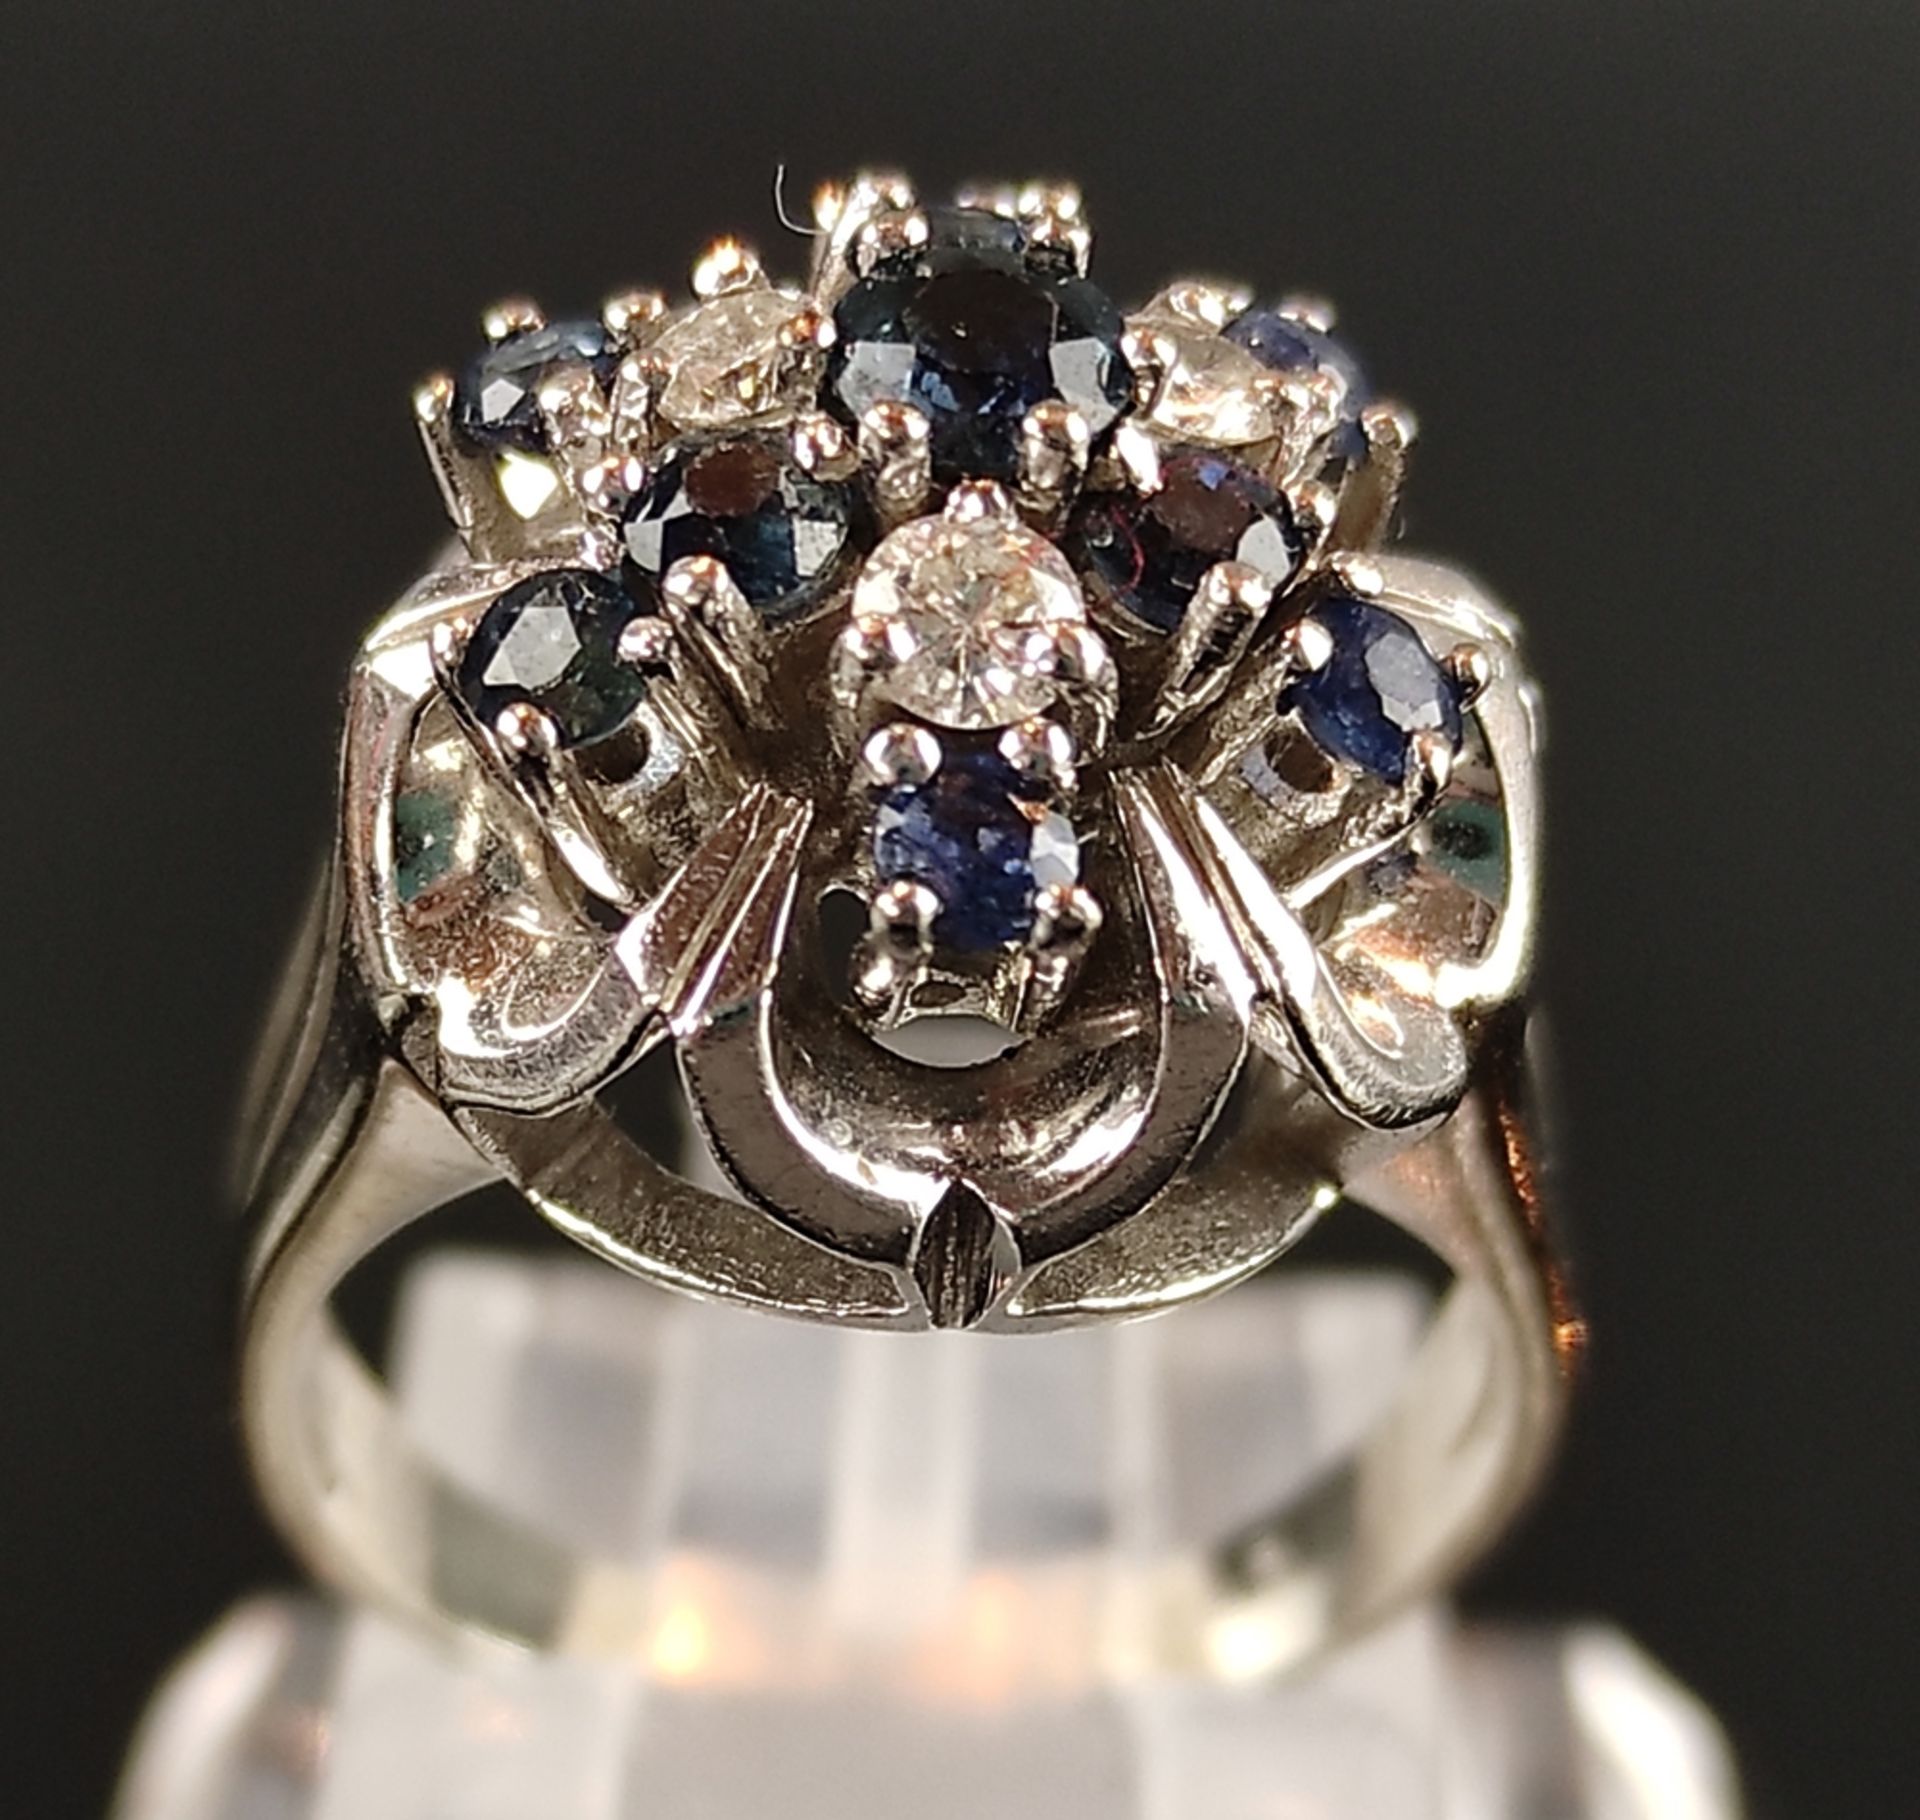 Diamond-sapphire-ring, with 10 sapphires and 3 diamonds, 585/14K white gold, 6.3g, size 48.5 - Image 4 of 6